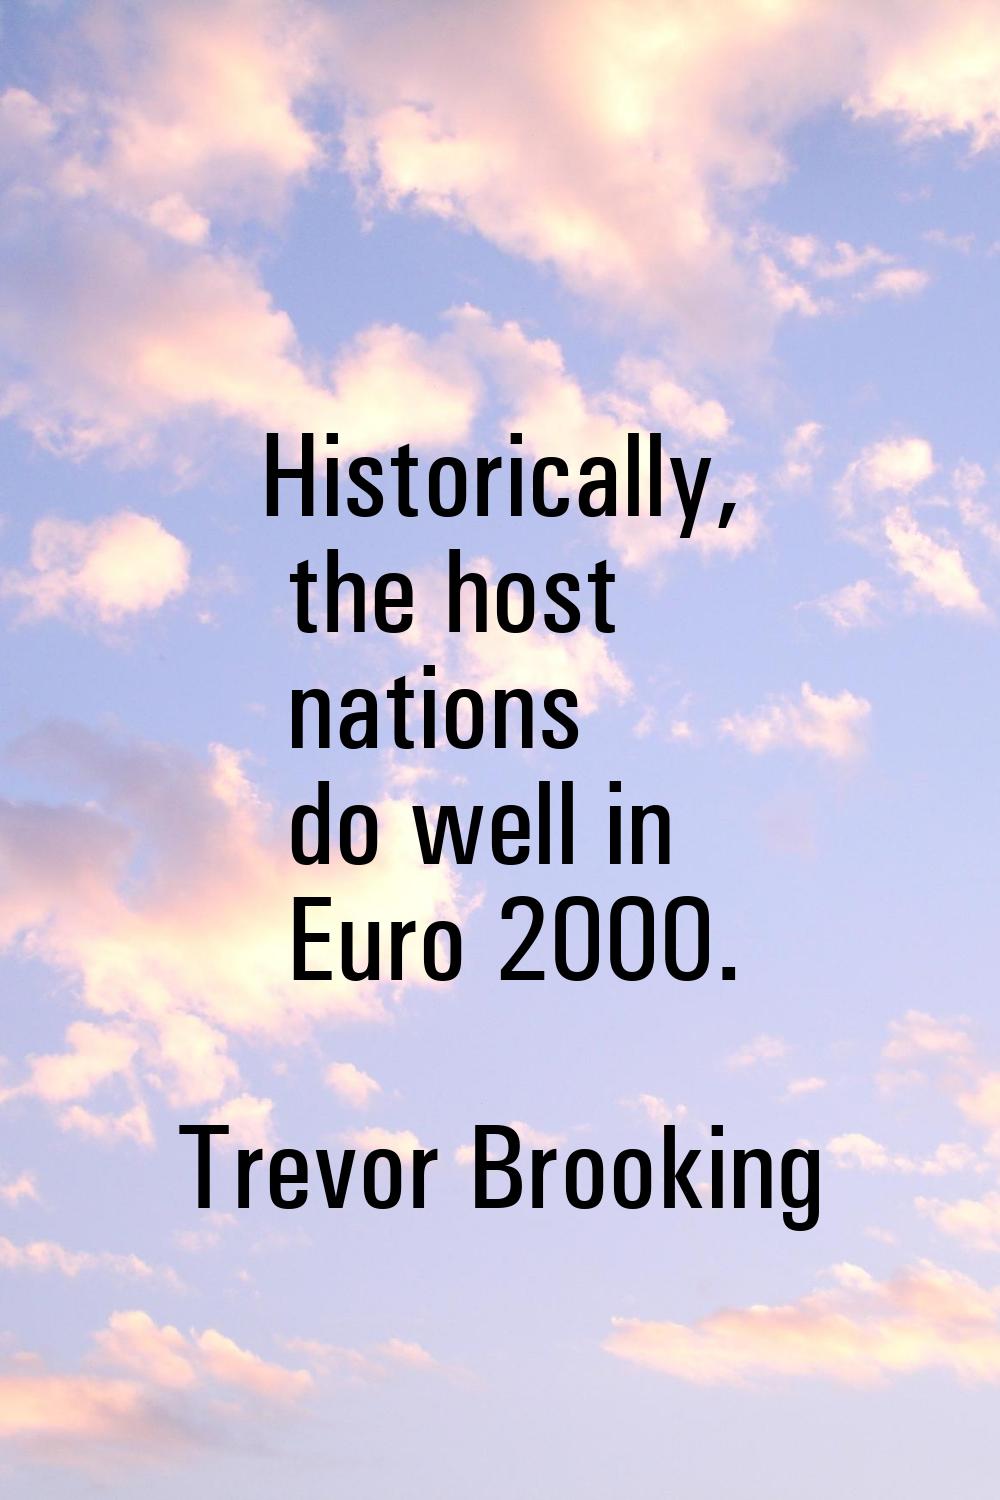 Historically, the host nations do well in Euro 2000.